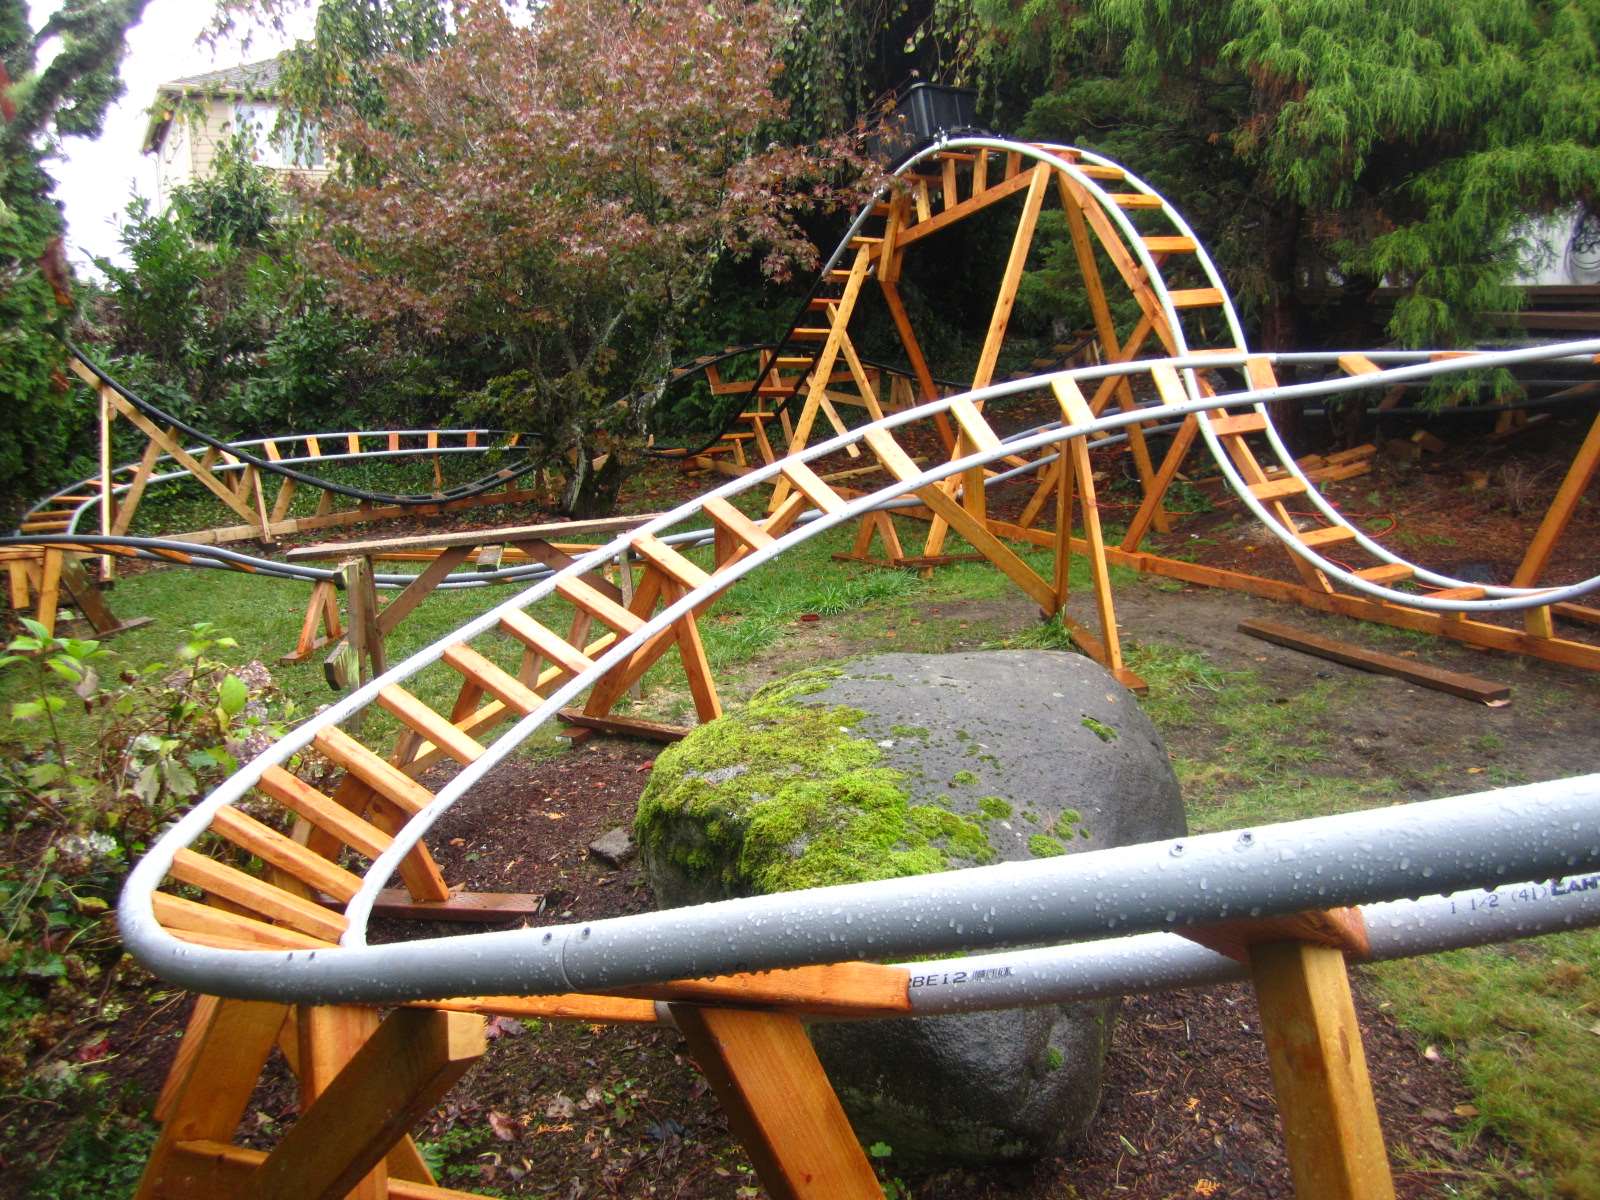 How To Build A Roller Coaster In Your Backyard